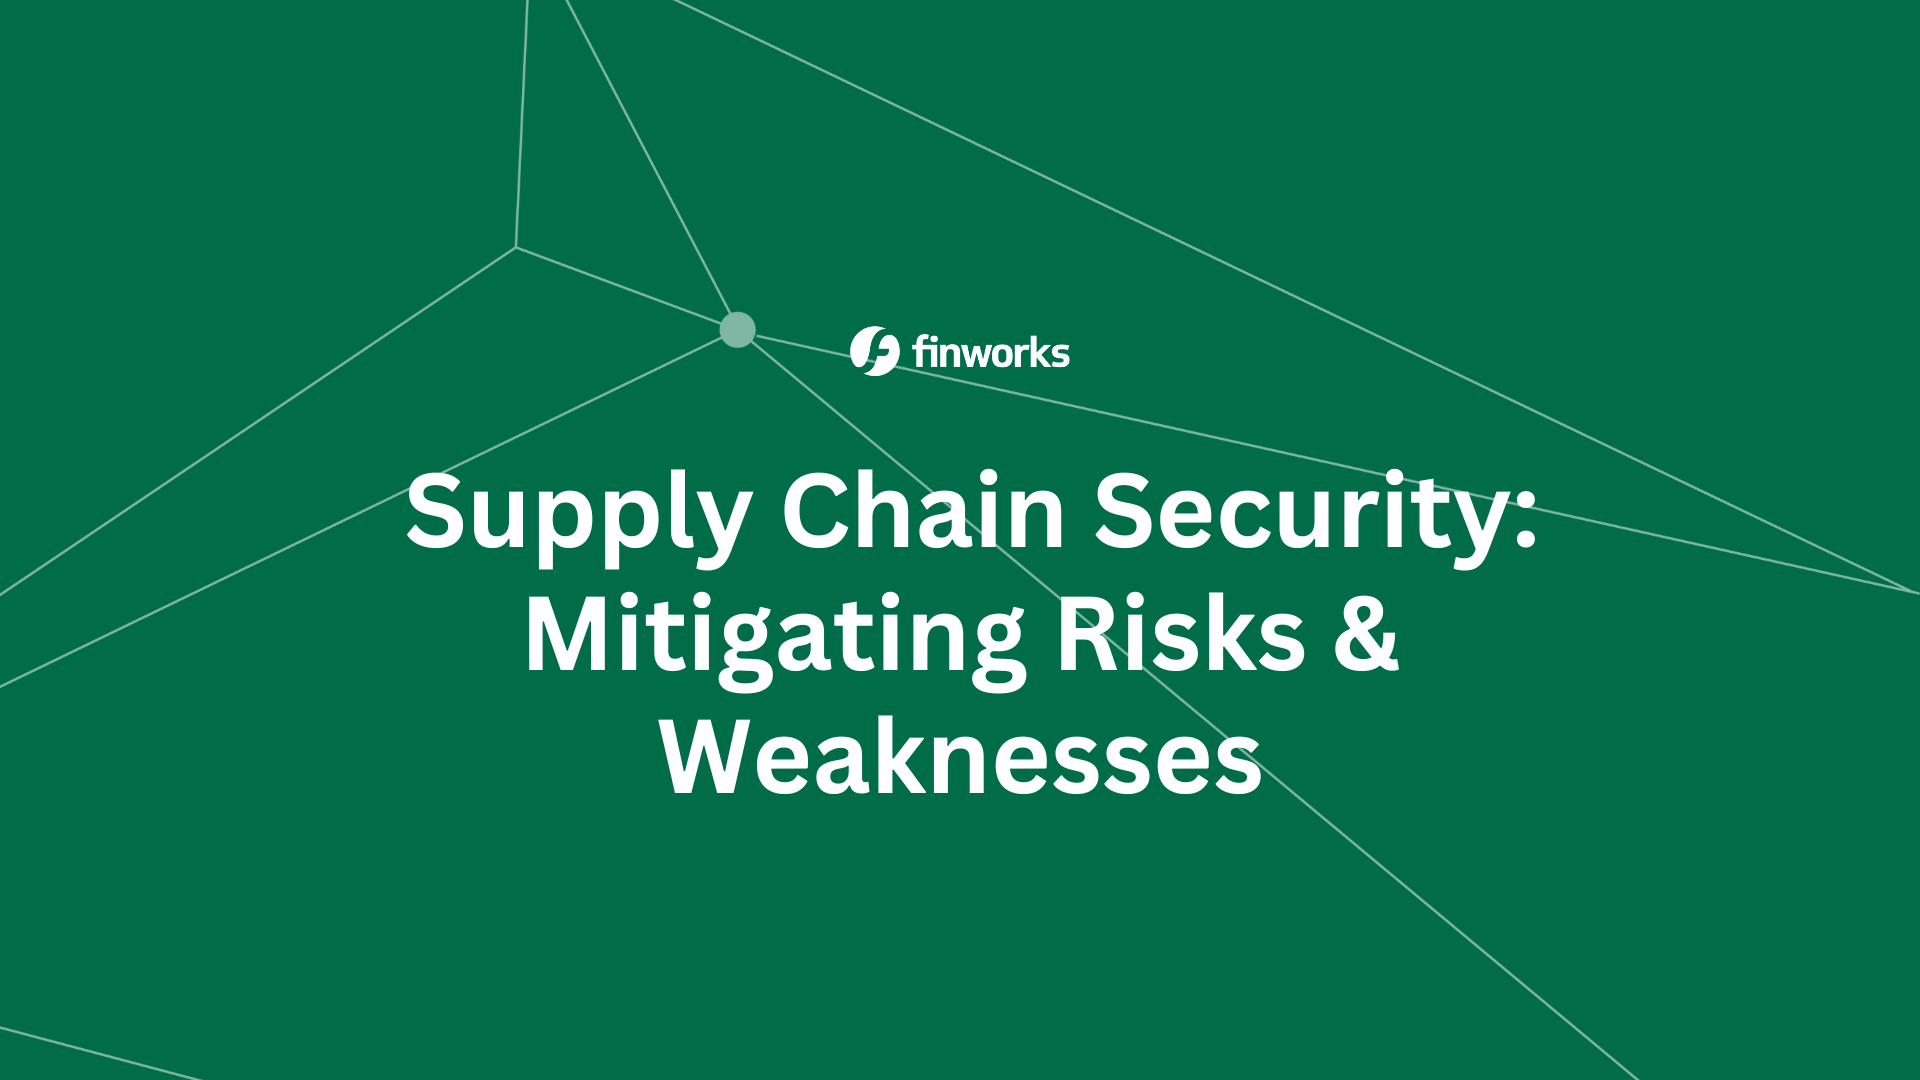 Supply Chain Security: Mitigating Risks & Weaknesses